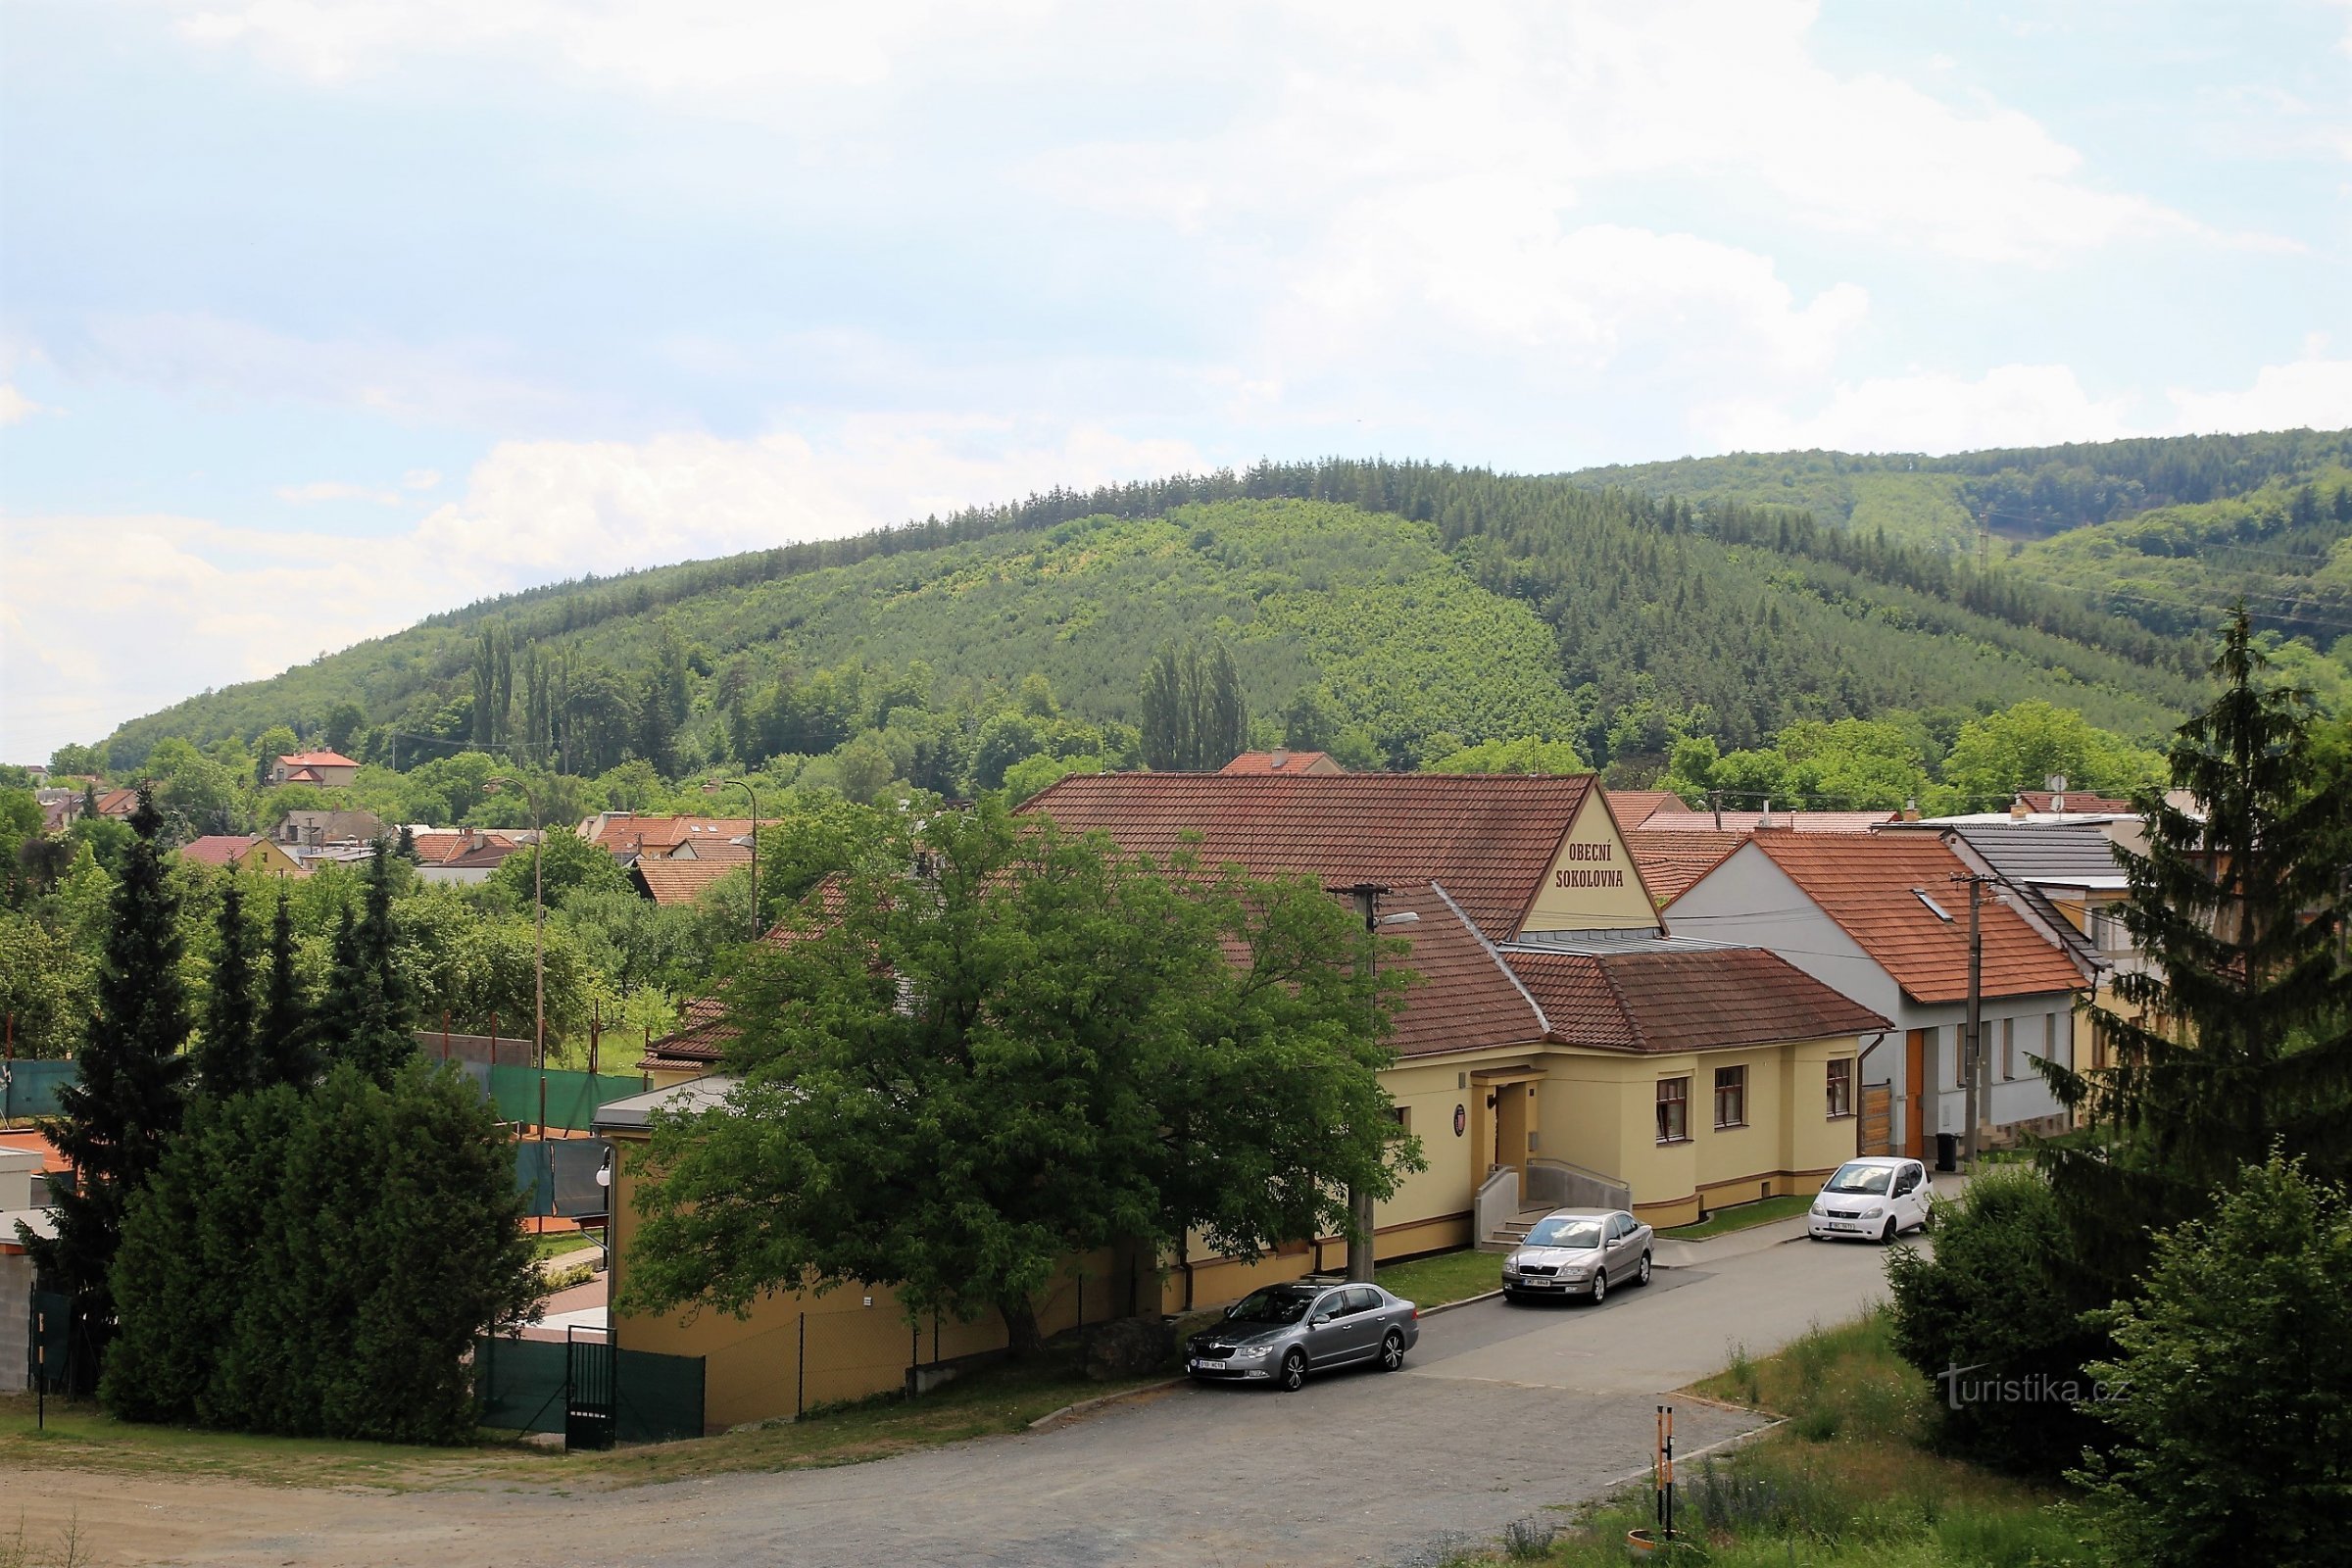 Ostrá hora rises directly above the village of Česká, behind it dominates the main ridge of Baby